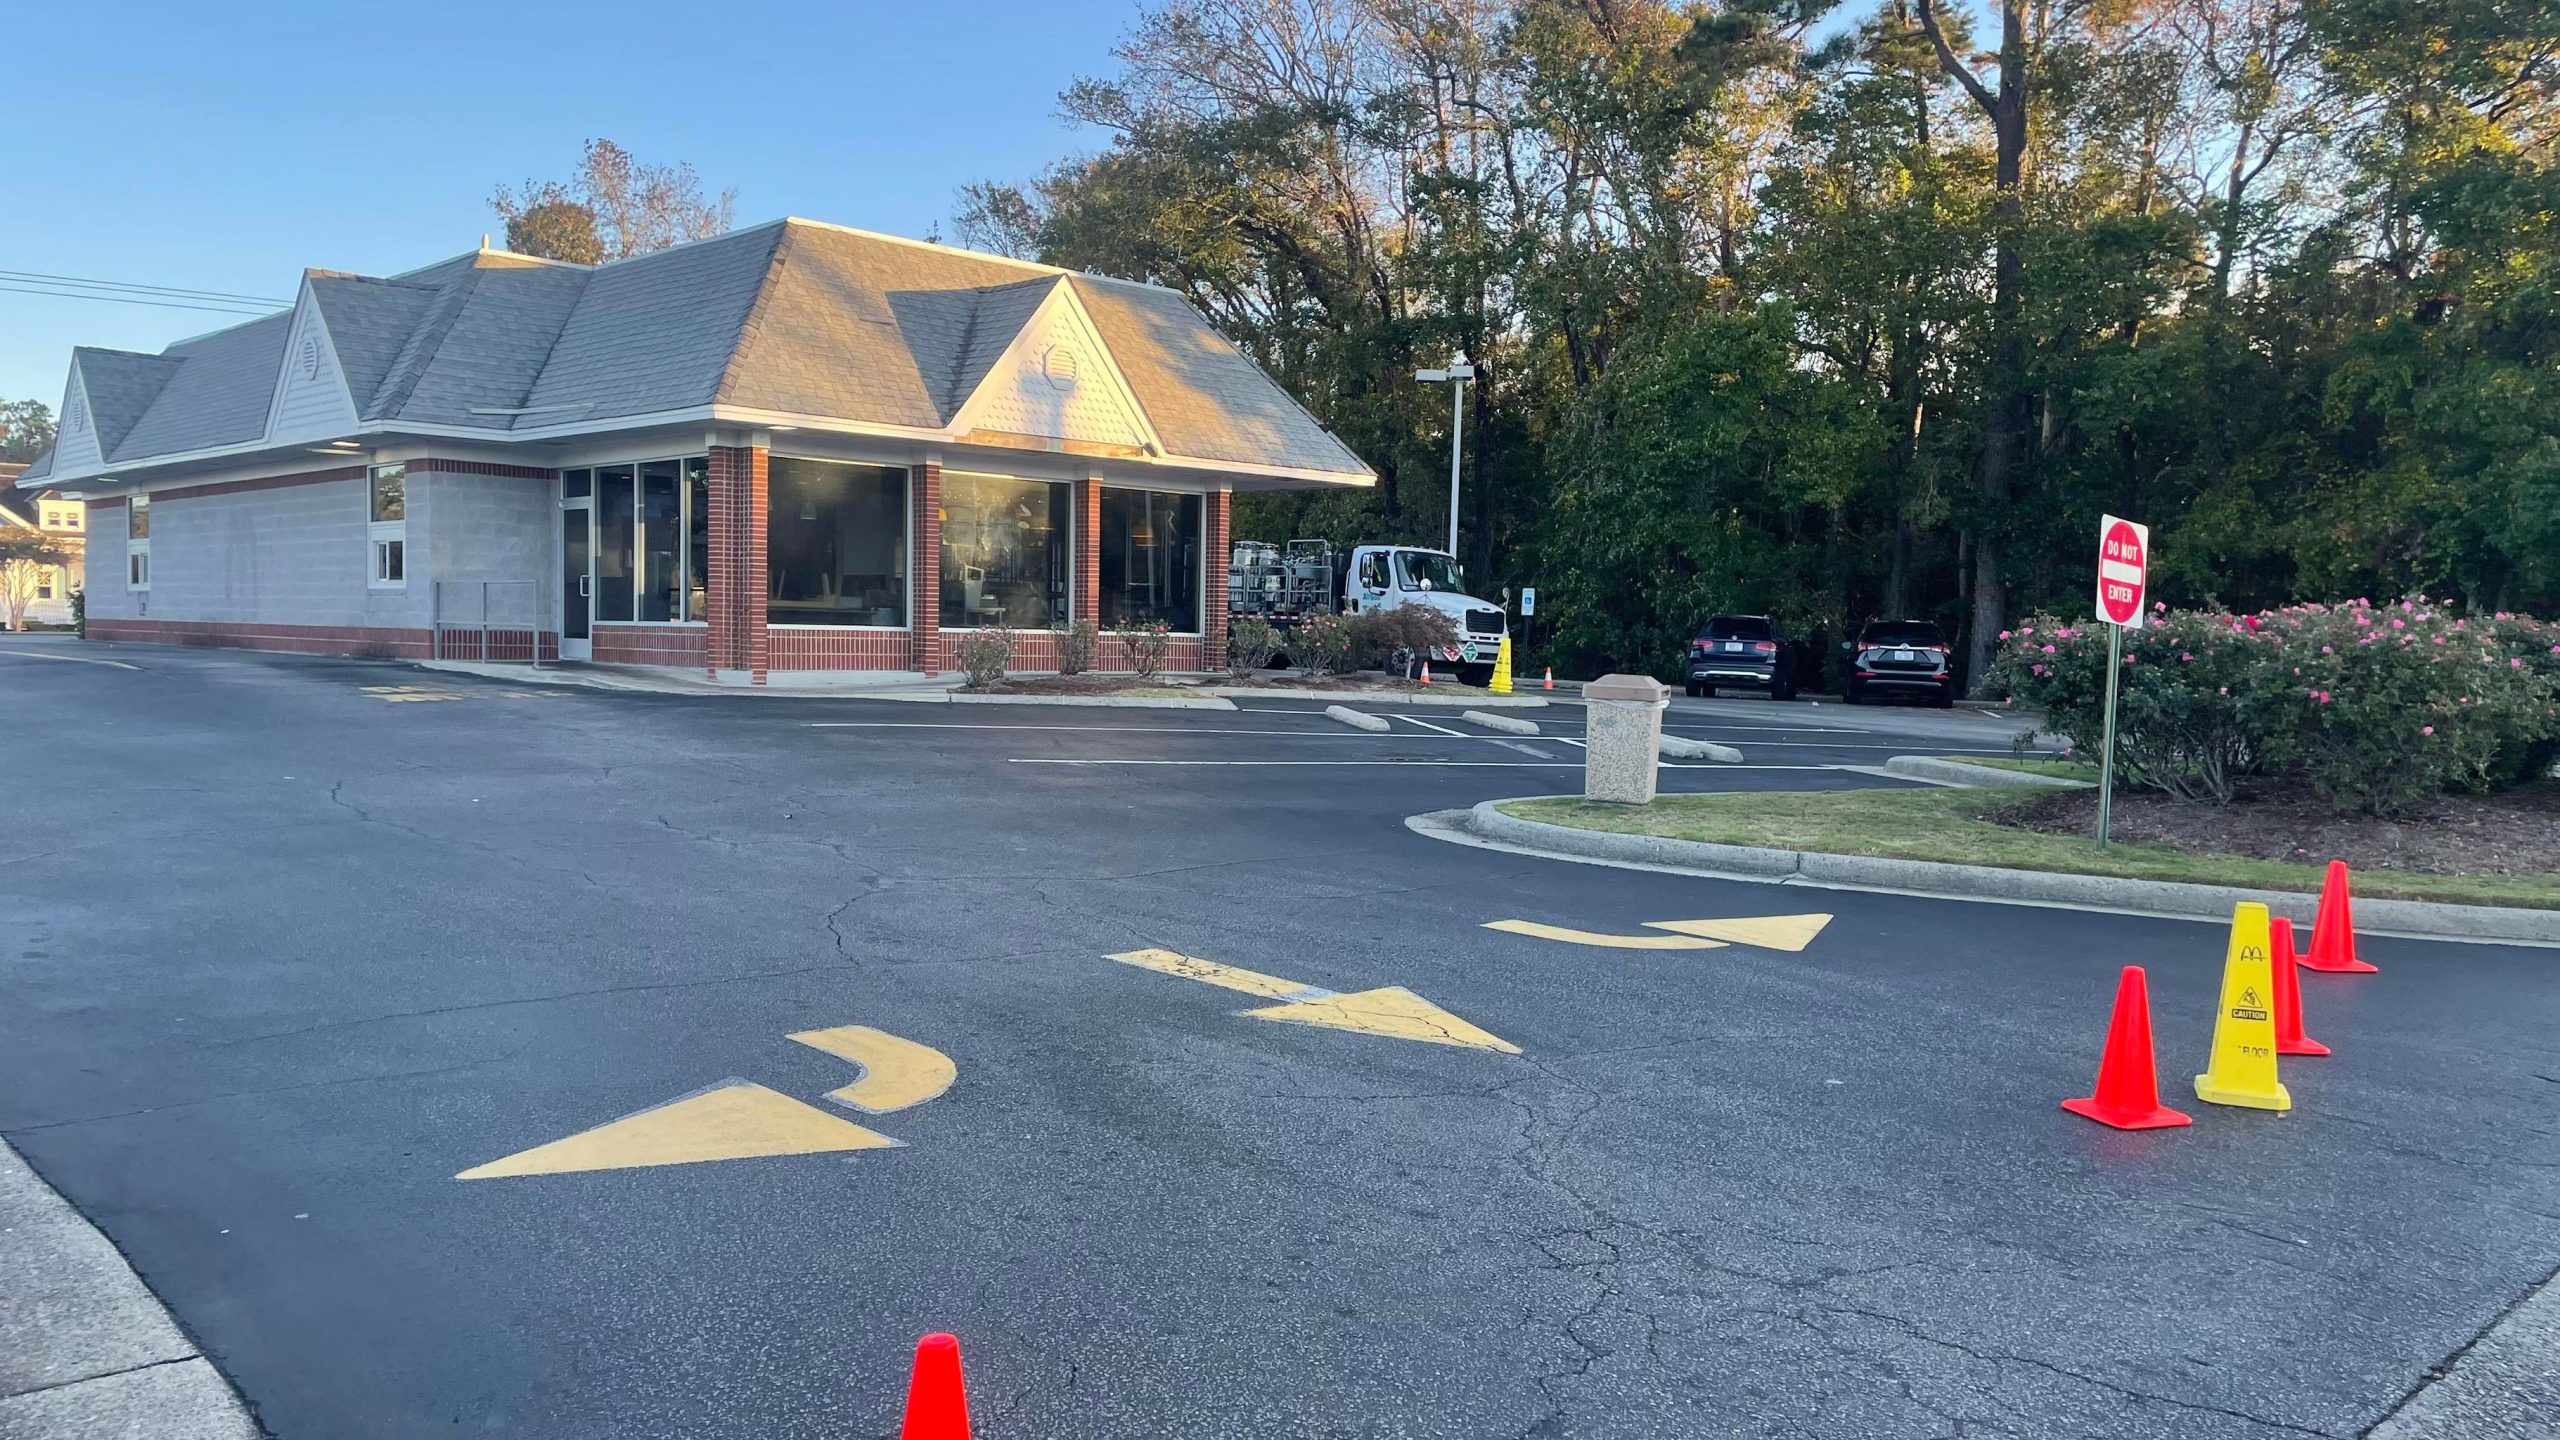 McDonald’s in Kitty Hawk closed by owner/operator in “real estate decision”